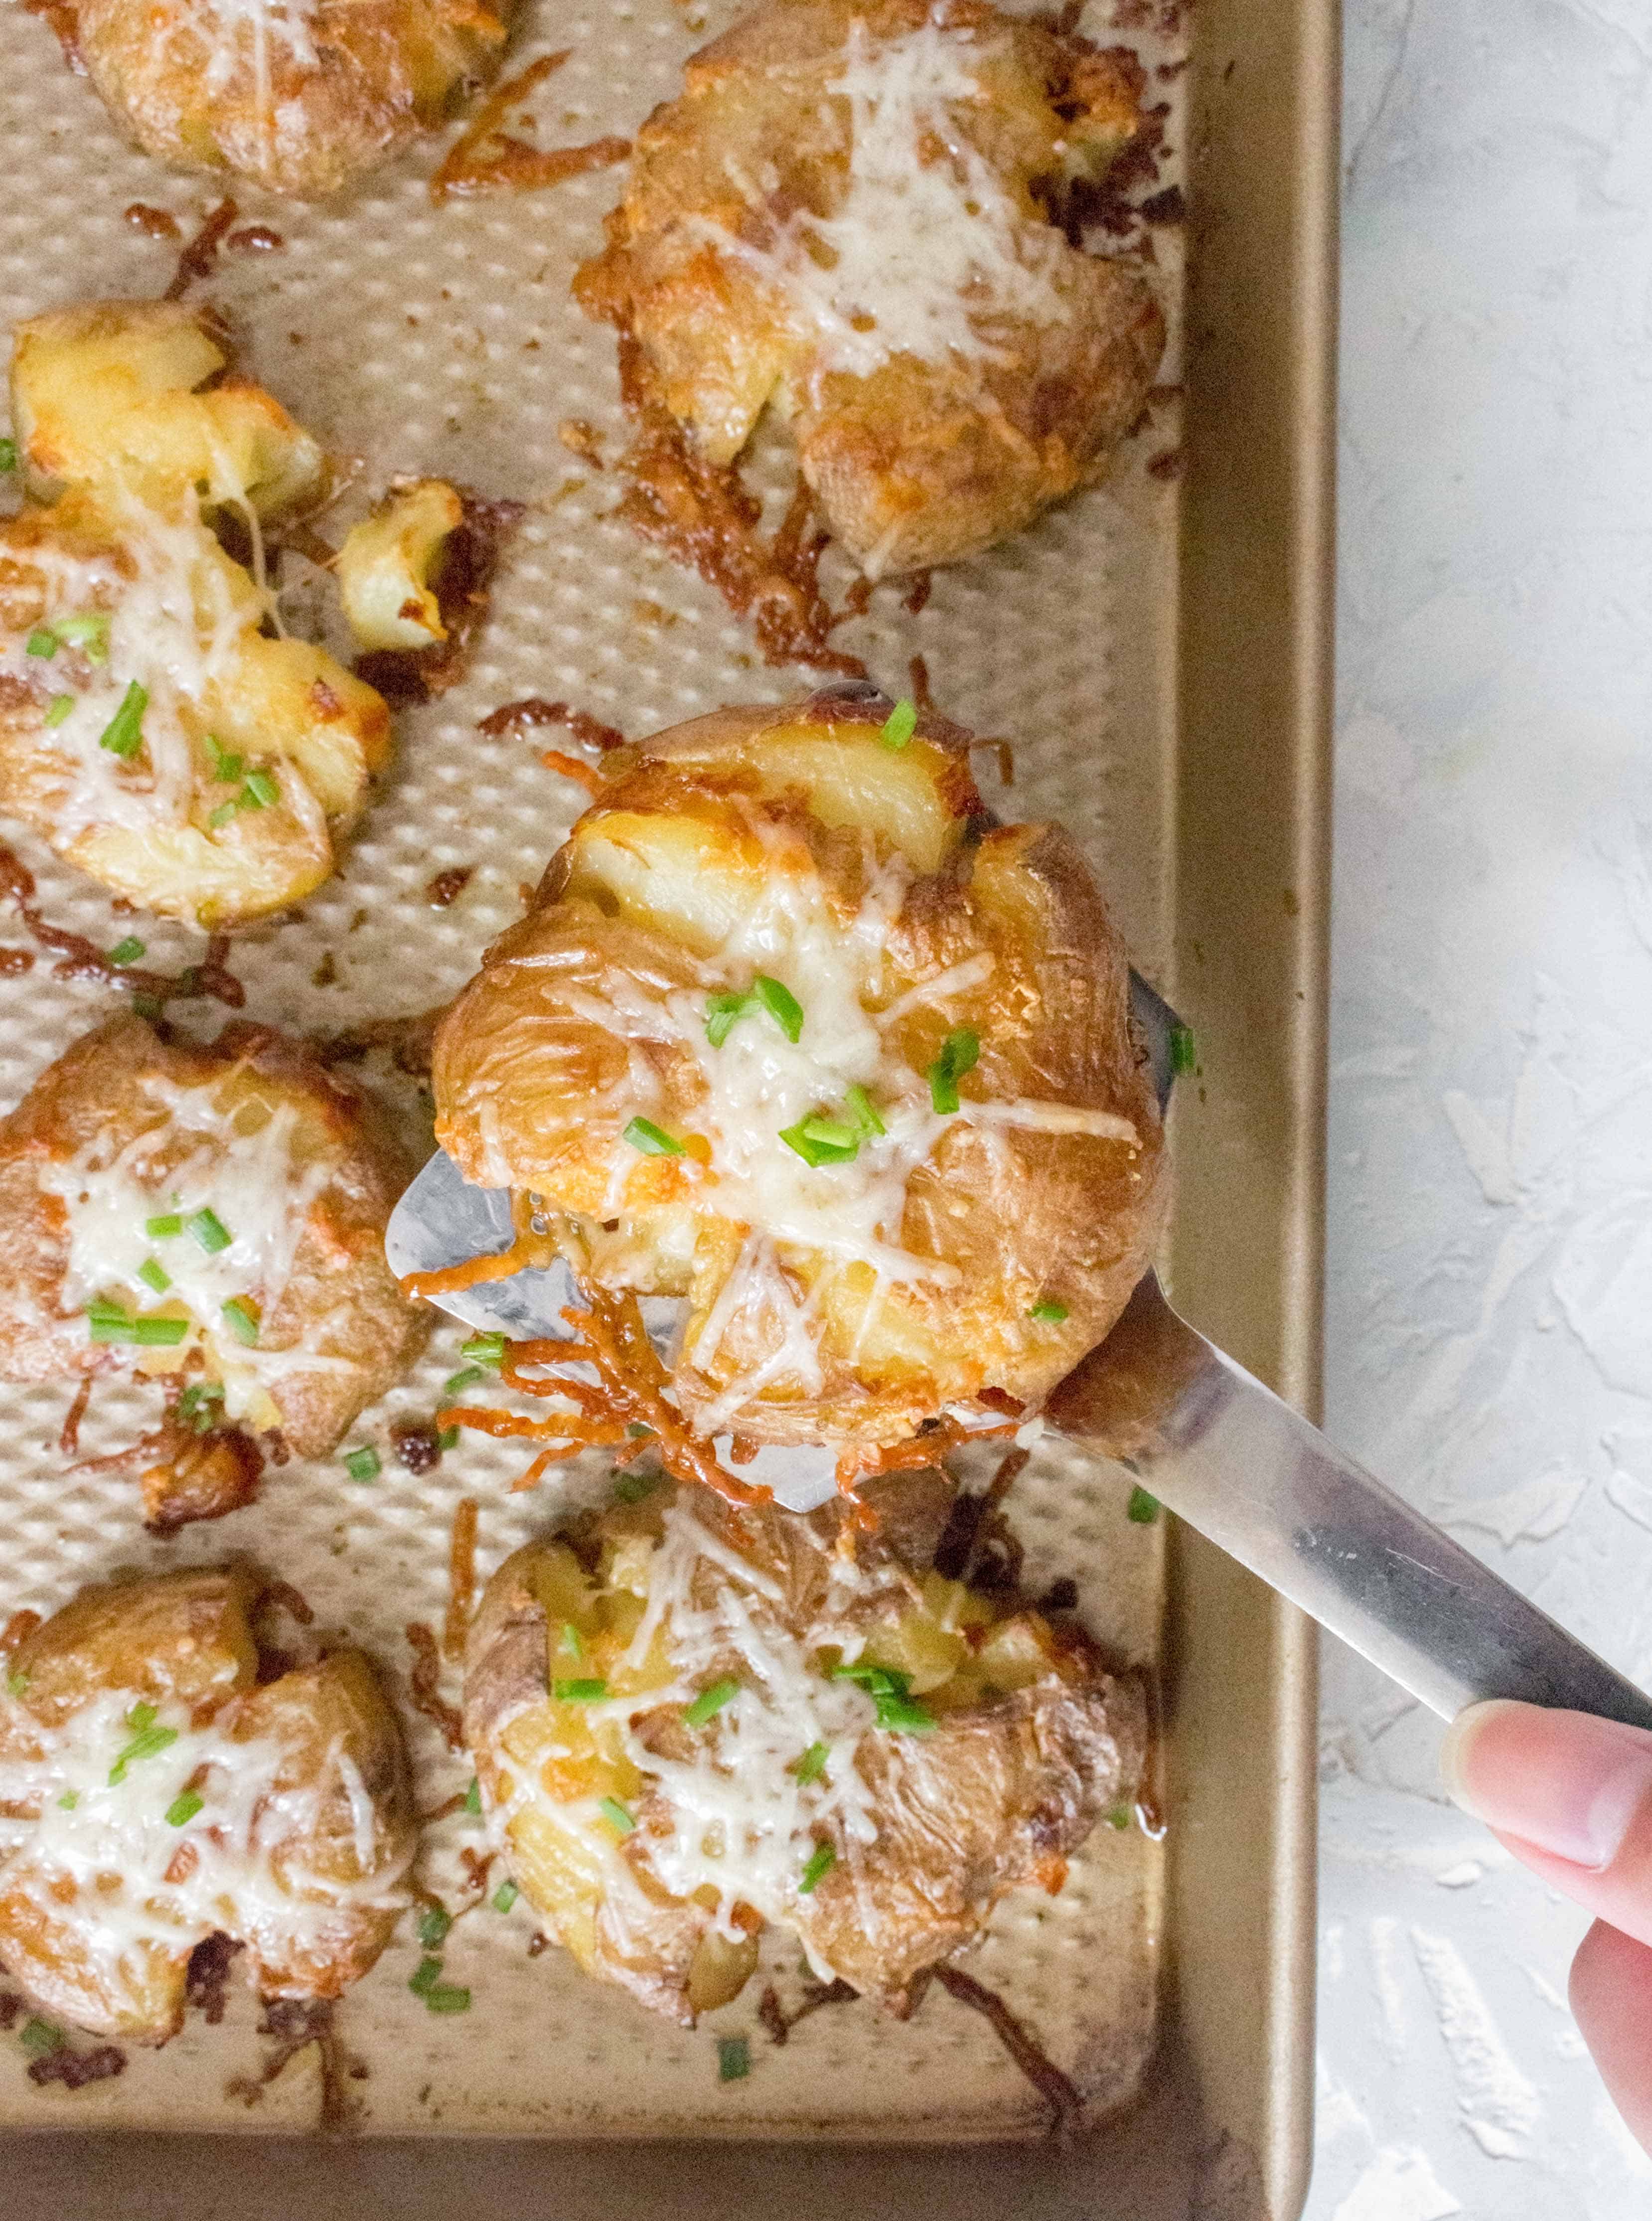 Crispy on the outside, fluffy on the inside, this Crispy Garlic Smashed Potatoes may just steal the show as the best side dish ever.